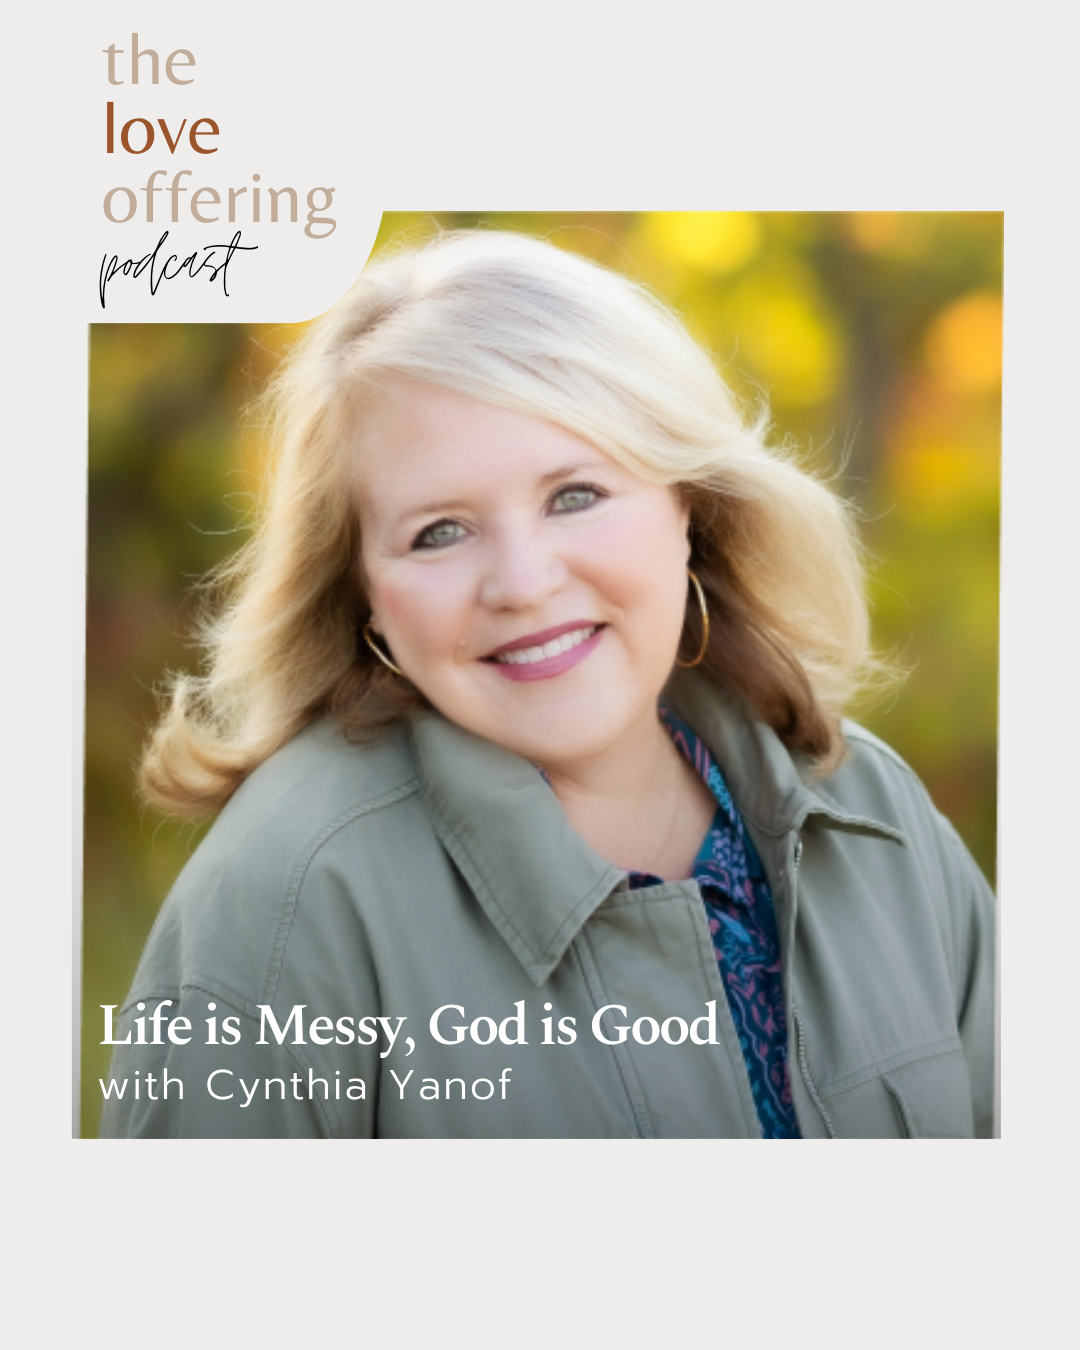 S6E7 Show Notes: Sanity for the Chaos of Everyday Life with Cynthia Yanof